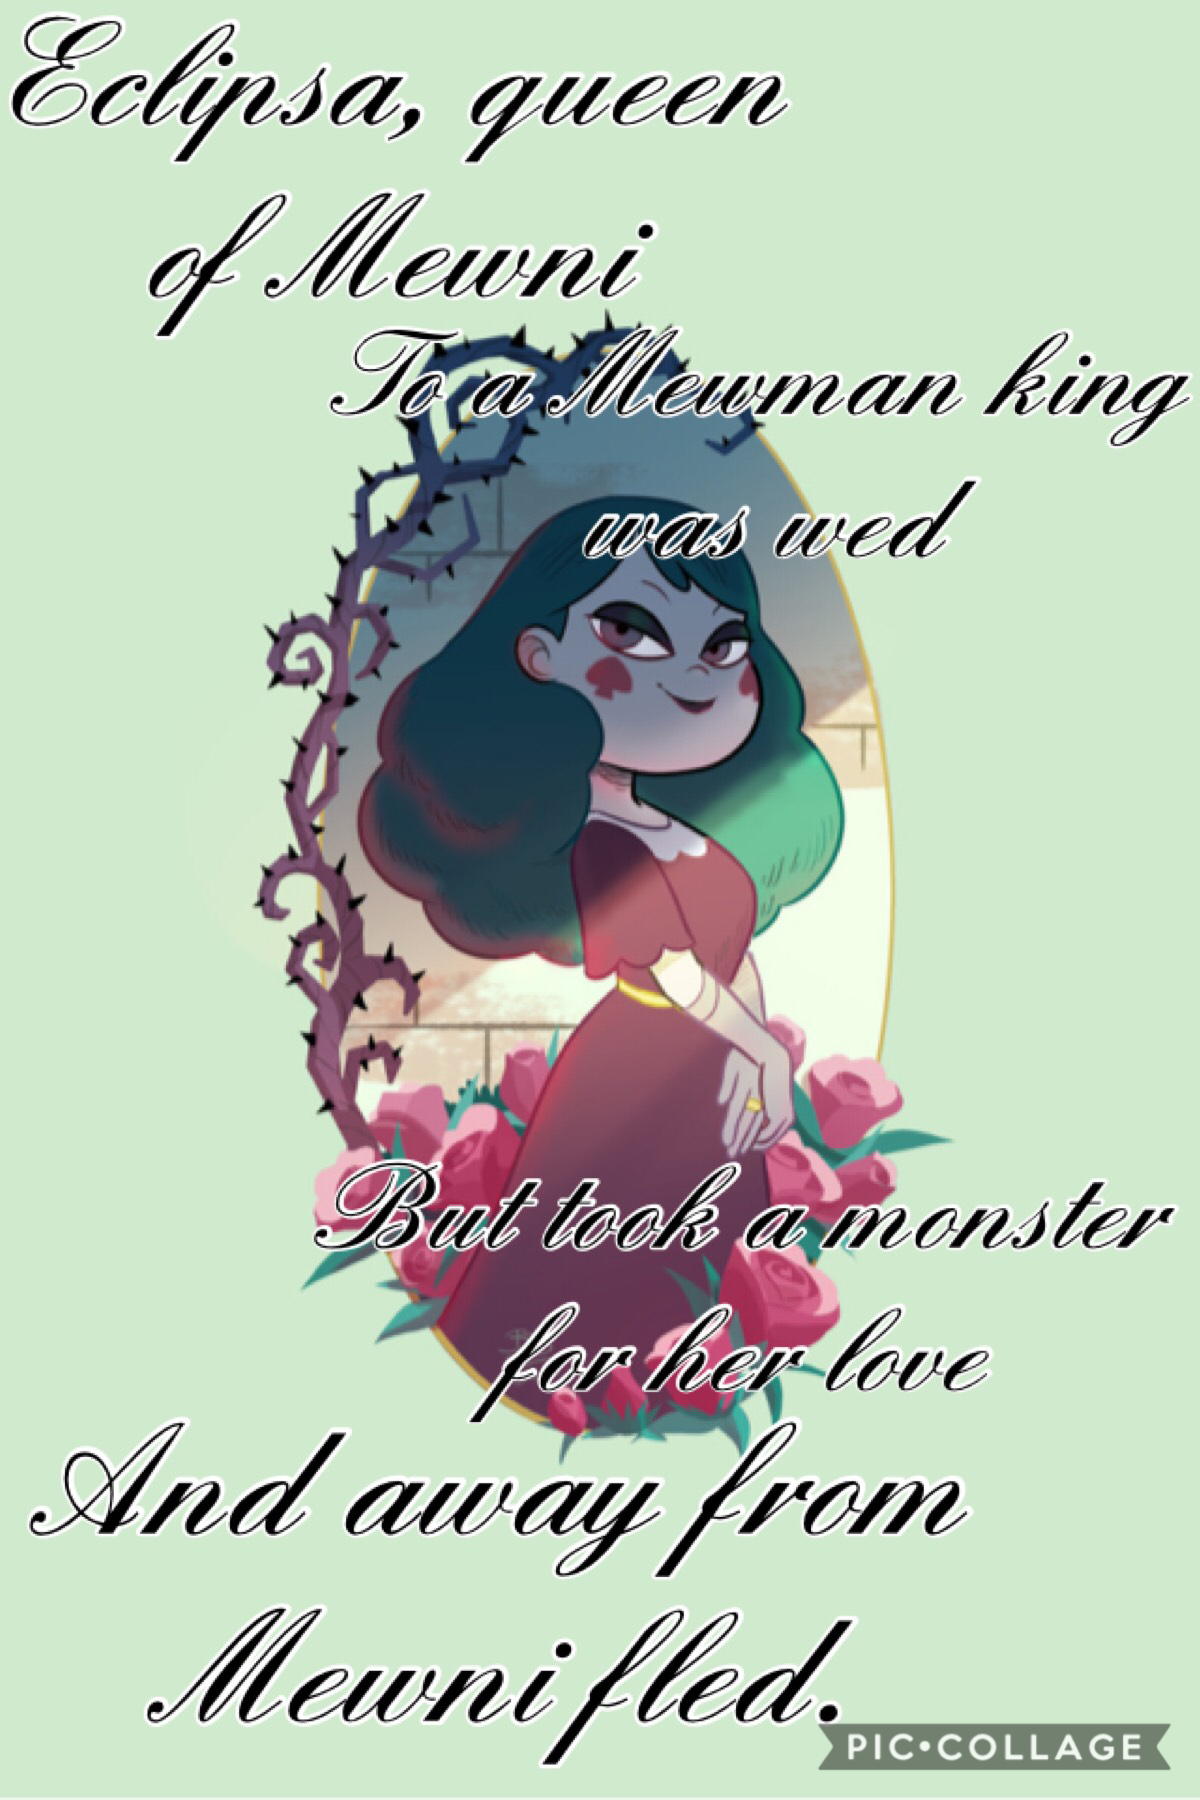 Eclipsa, Queen Of Darkness. Aka my favorite. She’s so beautiful. And being a child of Aphrodite, I appreciate beauty.